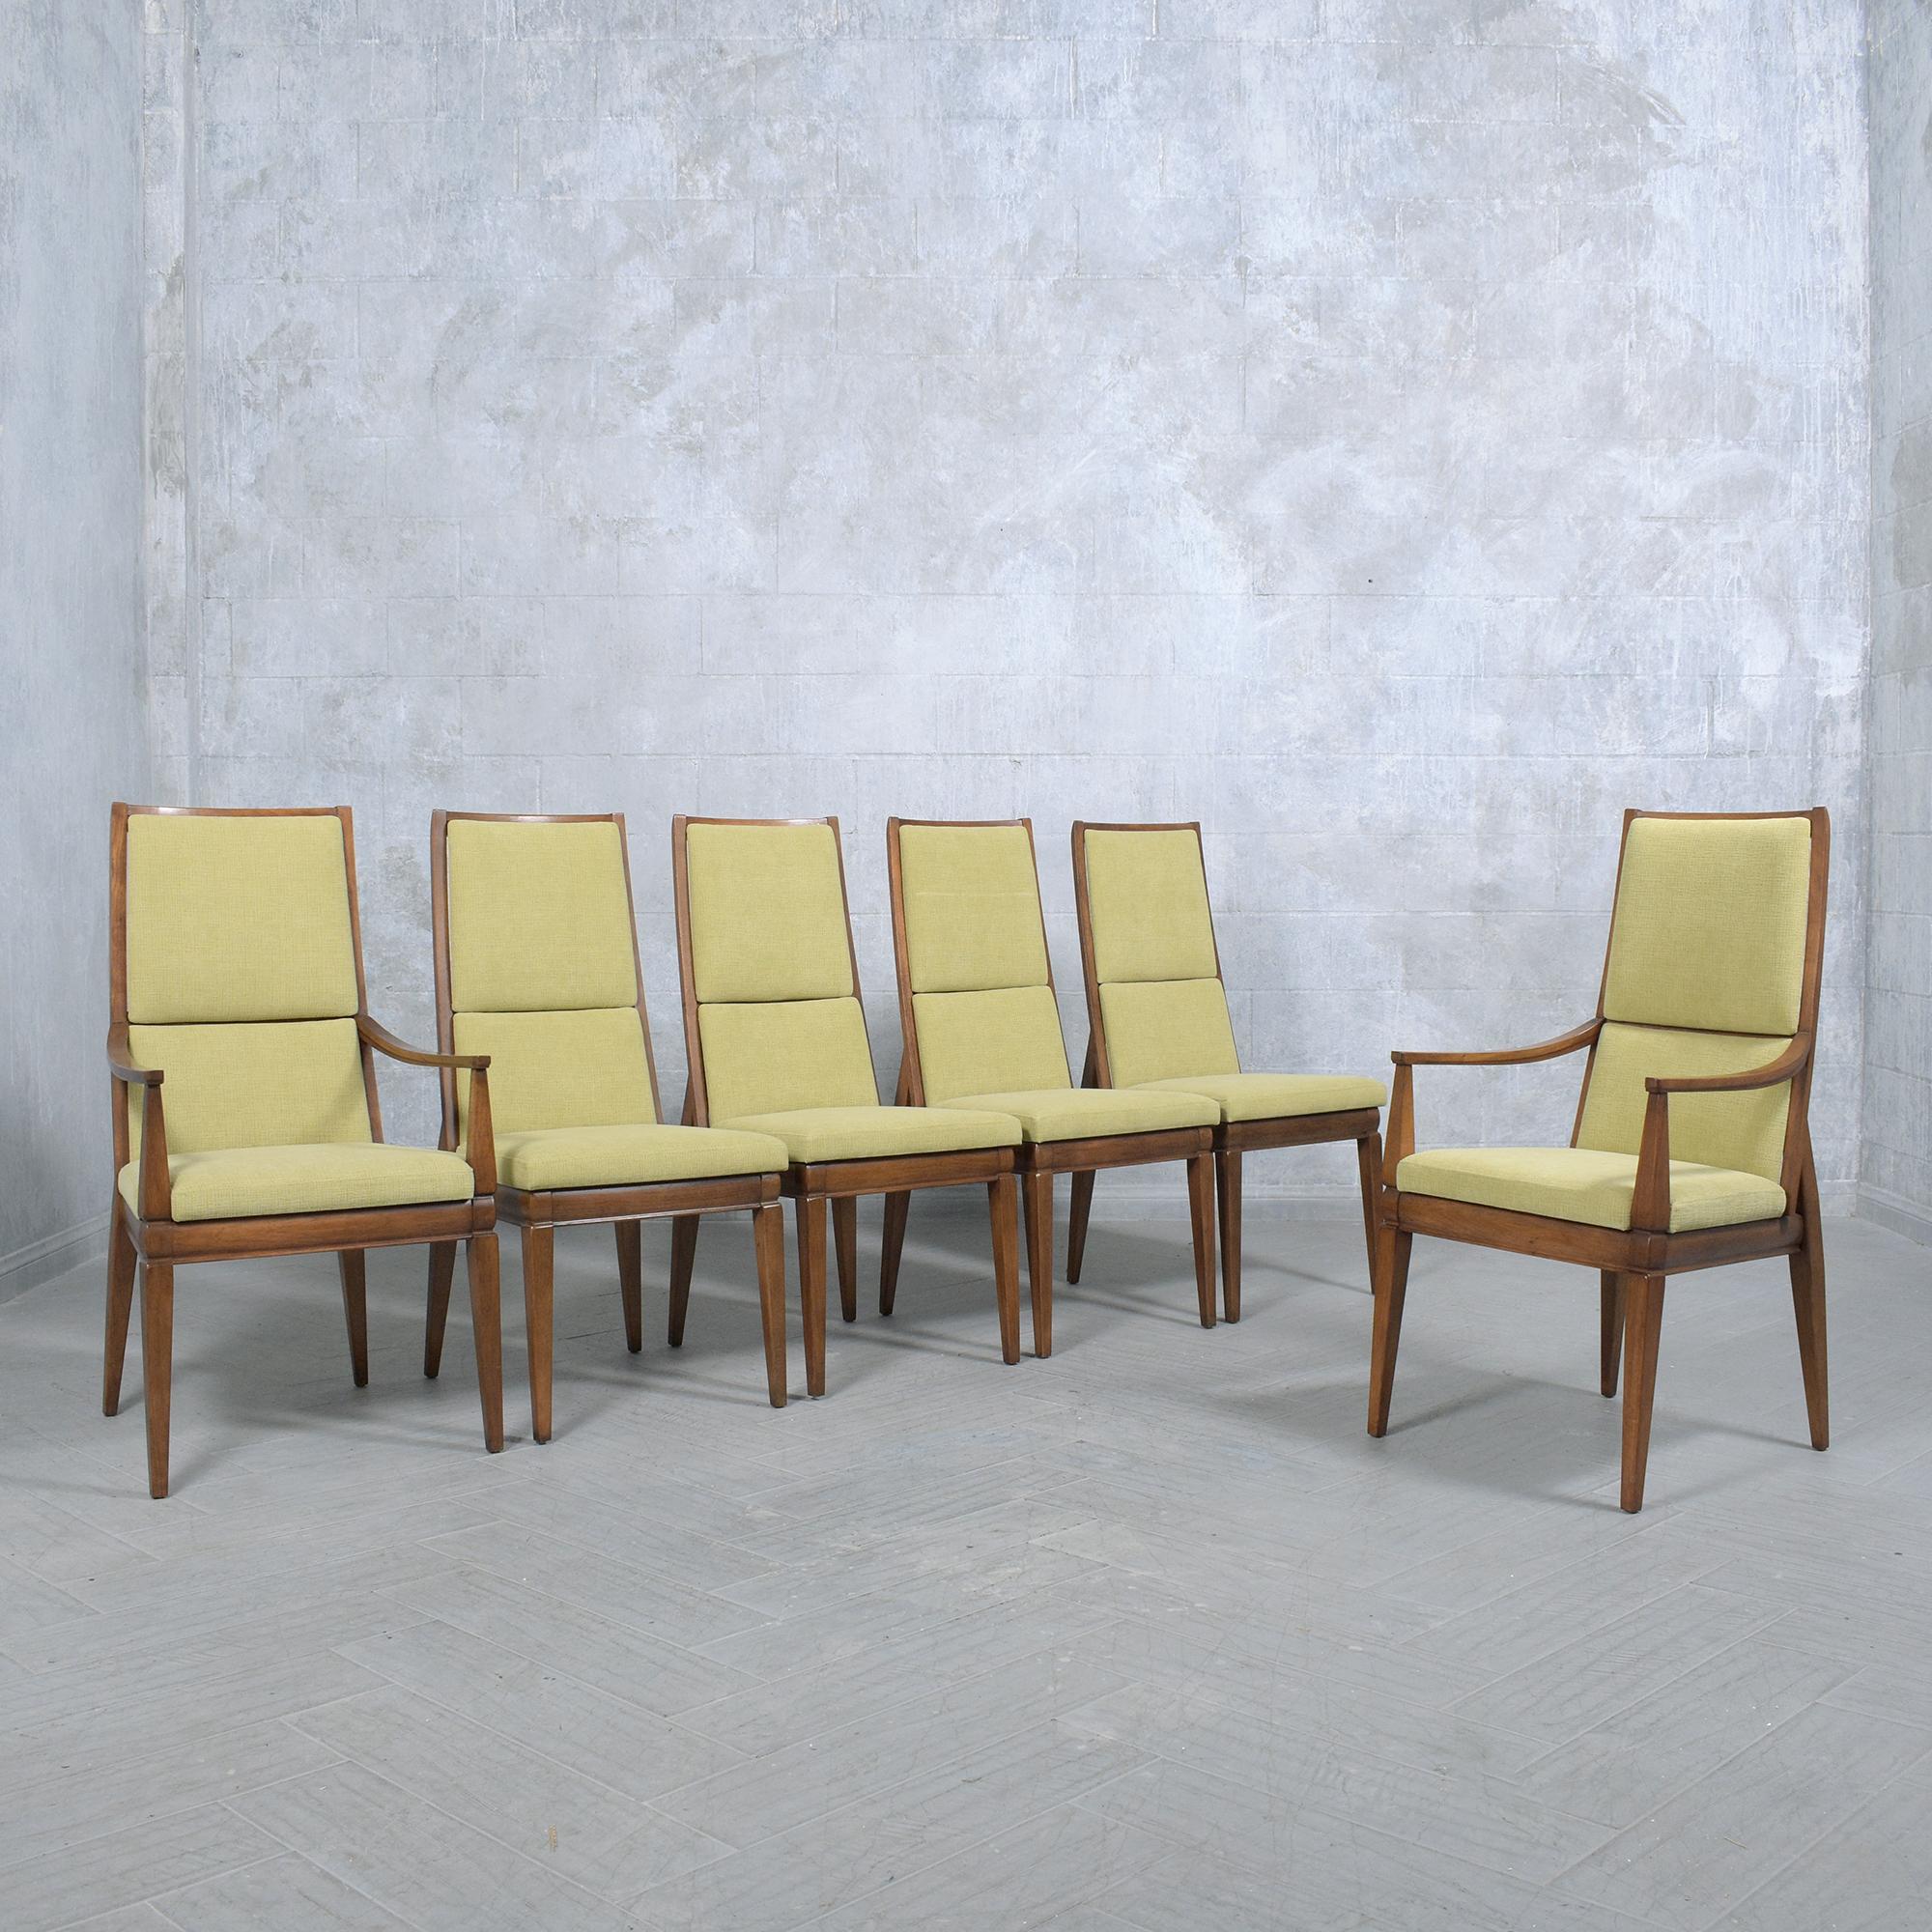 Journey back to the stylish 1960s with our beautifully restored collection of vintage modern dining chairs, a perfect homage to the celebrated craftsmanship and design of the era. This exquisite set features six mid-century marvels, including two